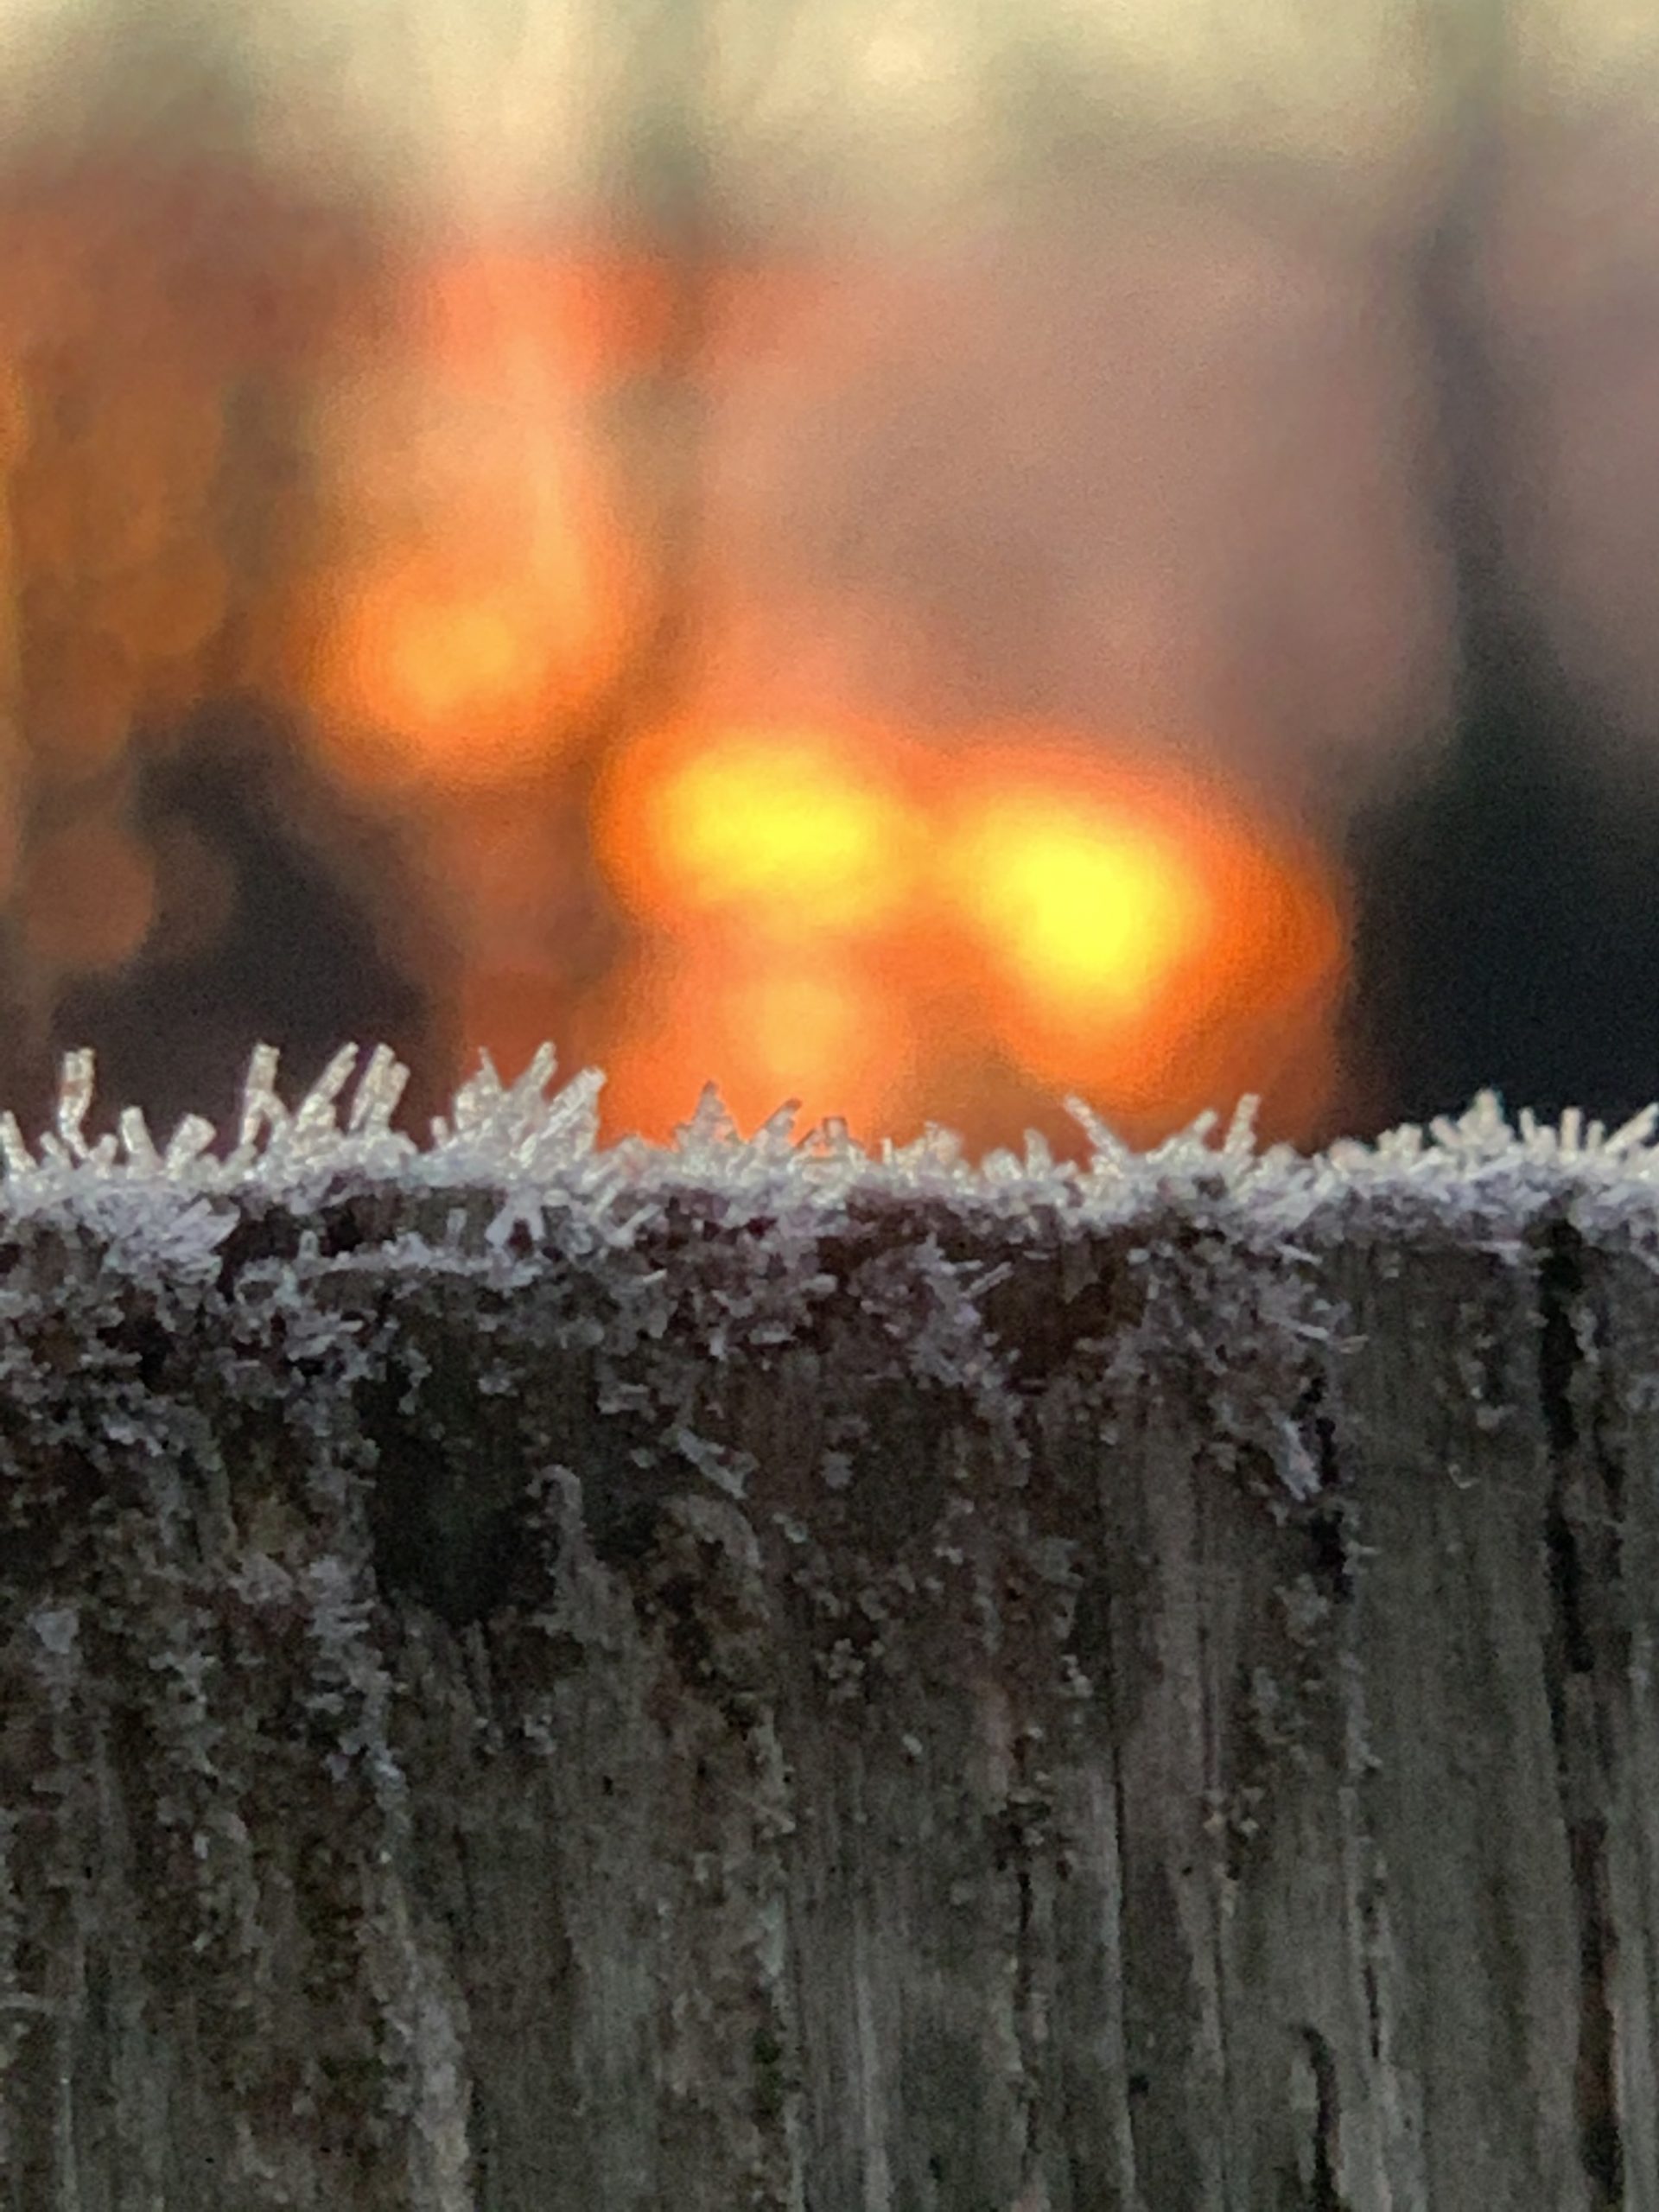 Frosty fence post against a morning sun